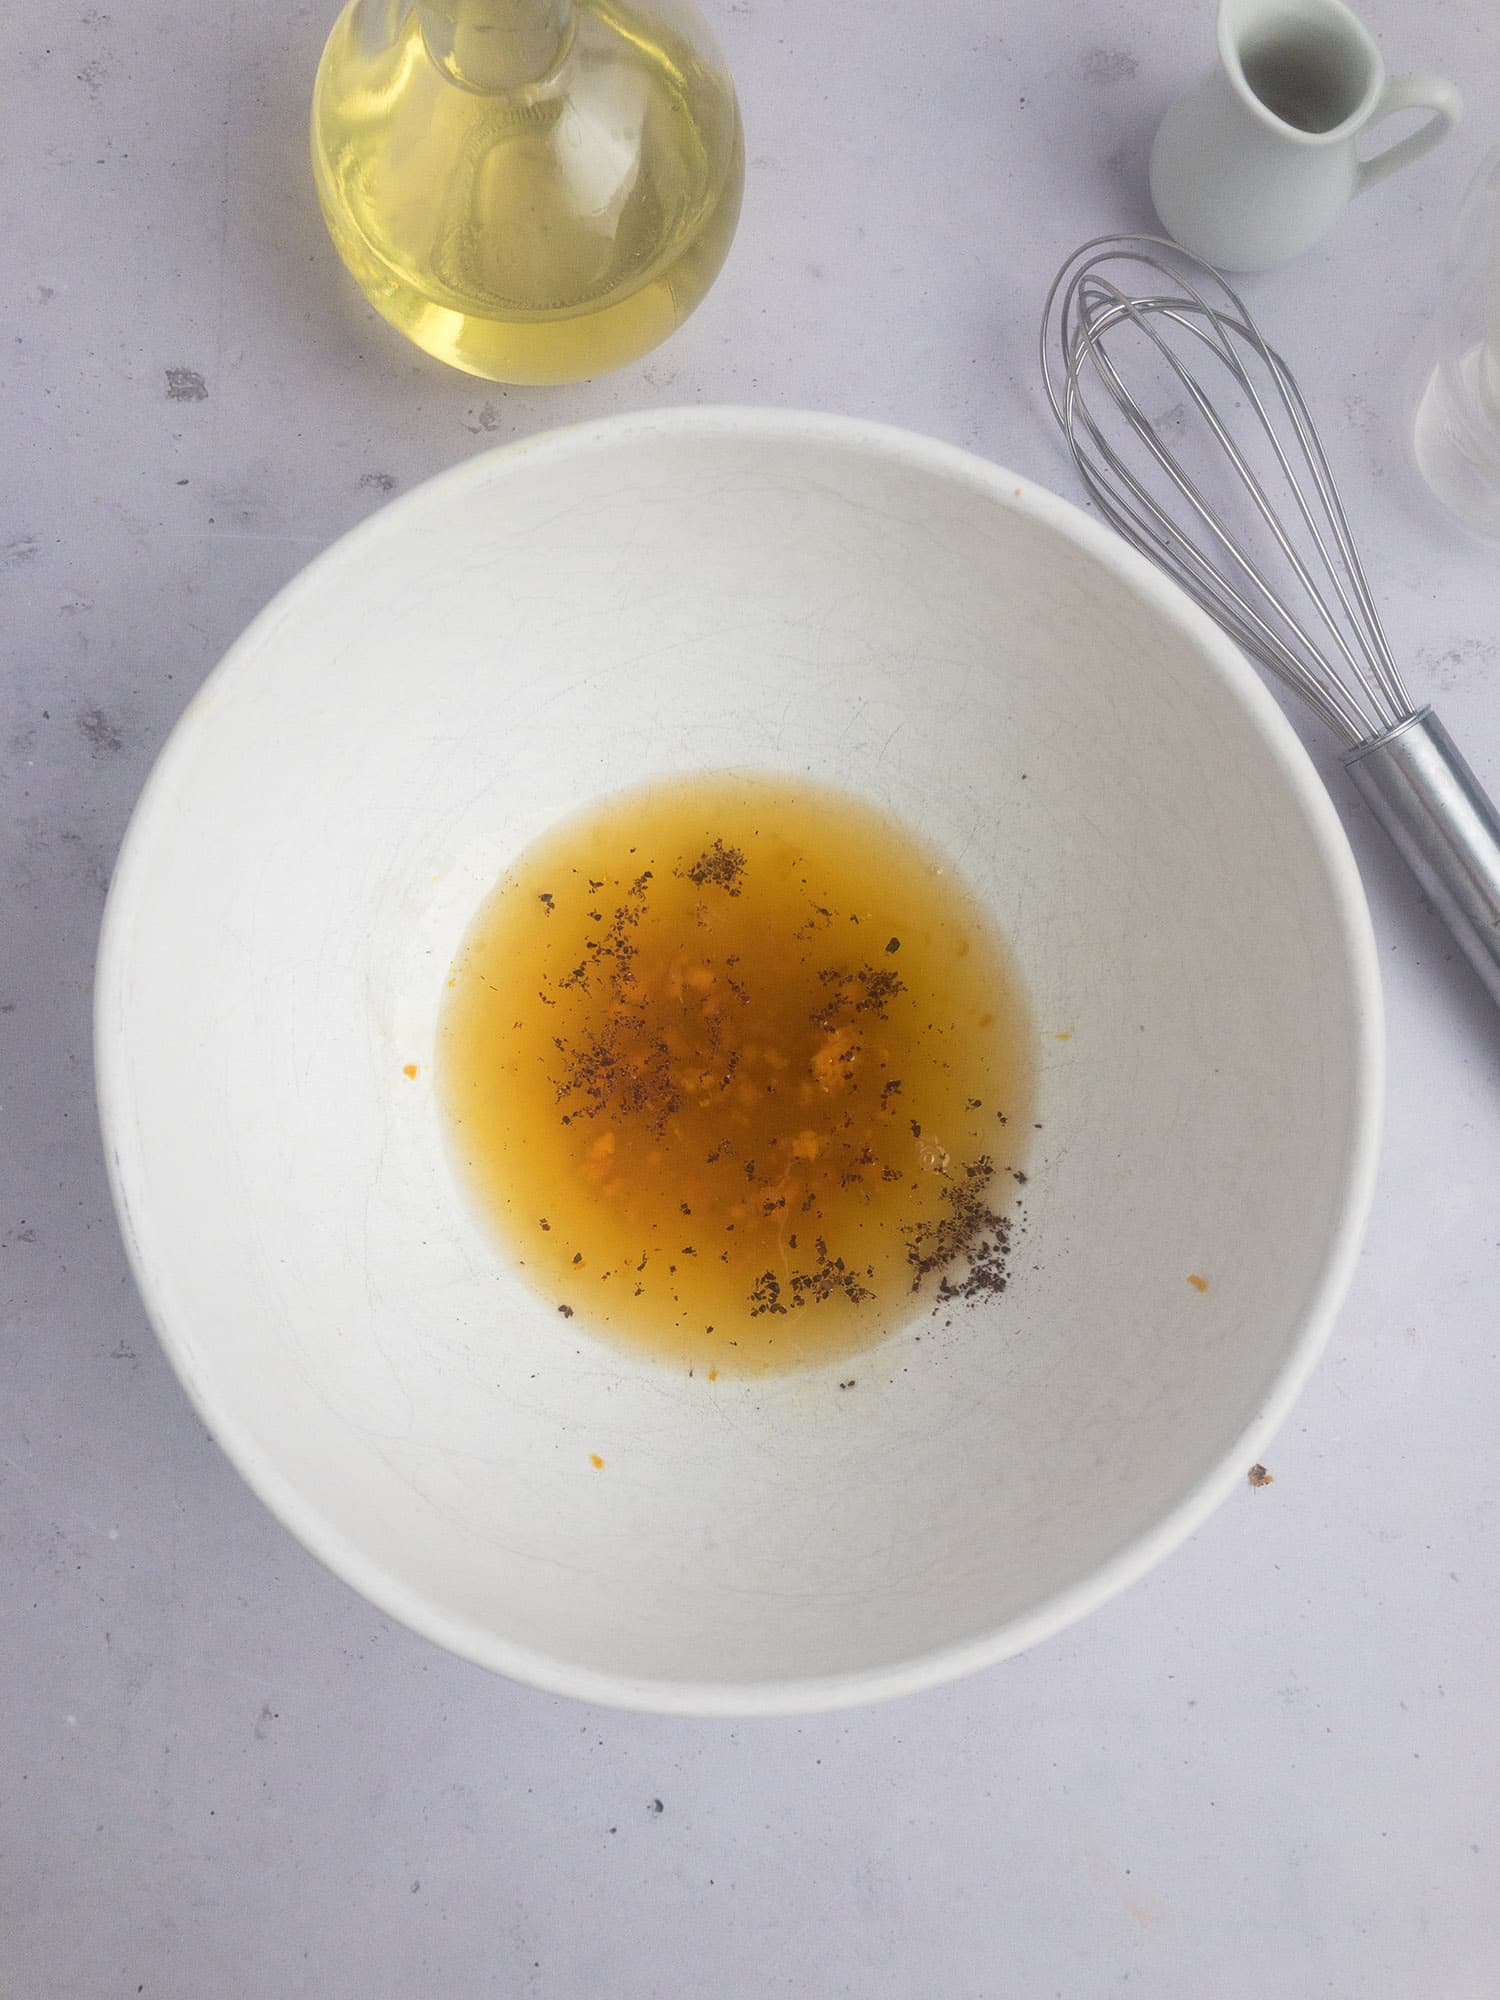 Top-down view of white bowl with ingredients for orange vinaigrette, including orange juice, maple syrup, orange zest, and sumac